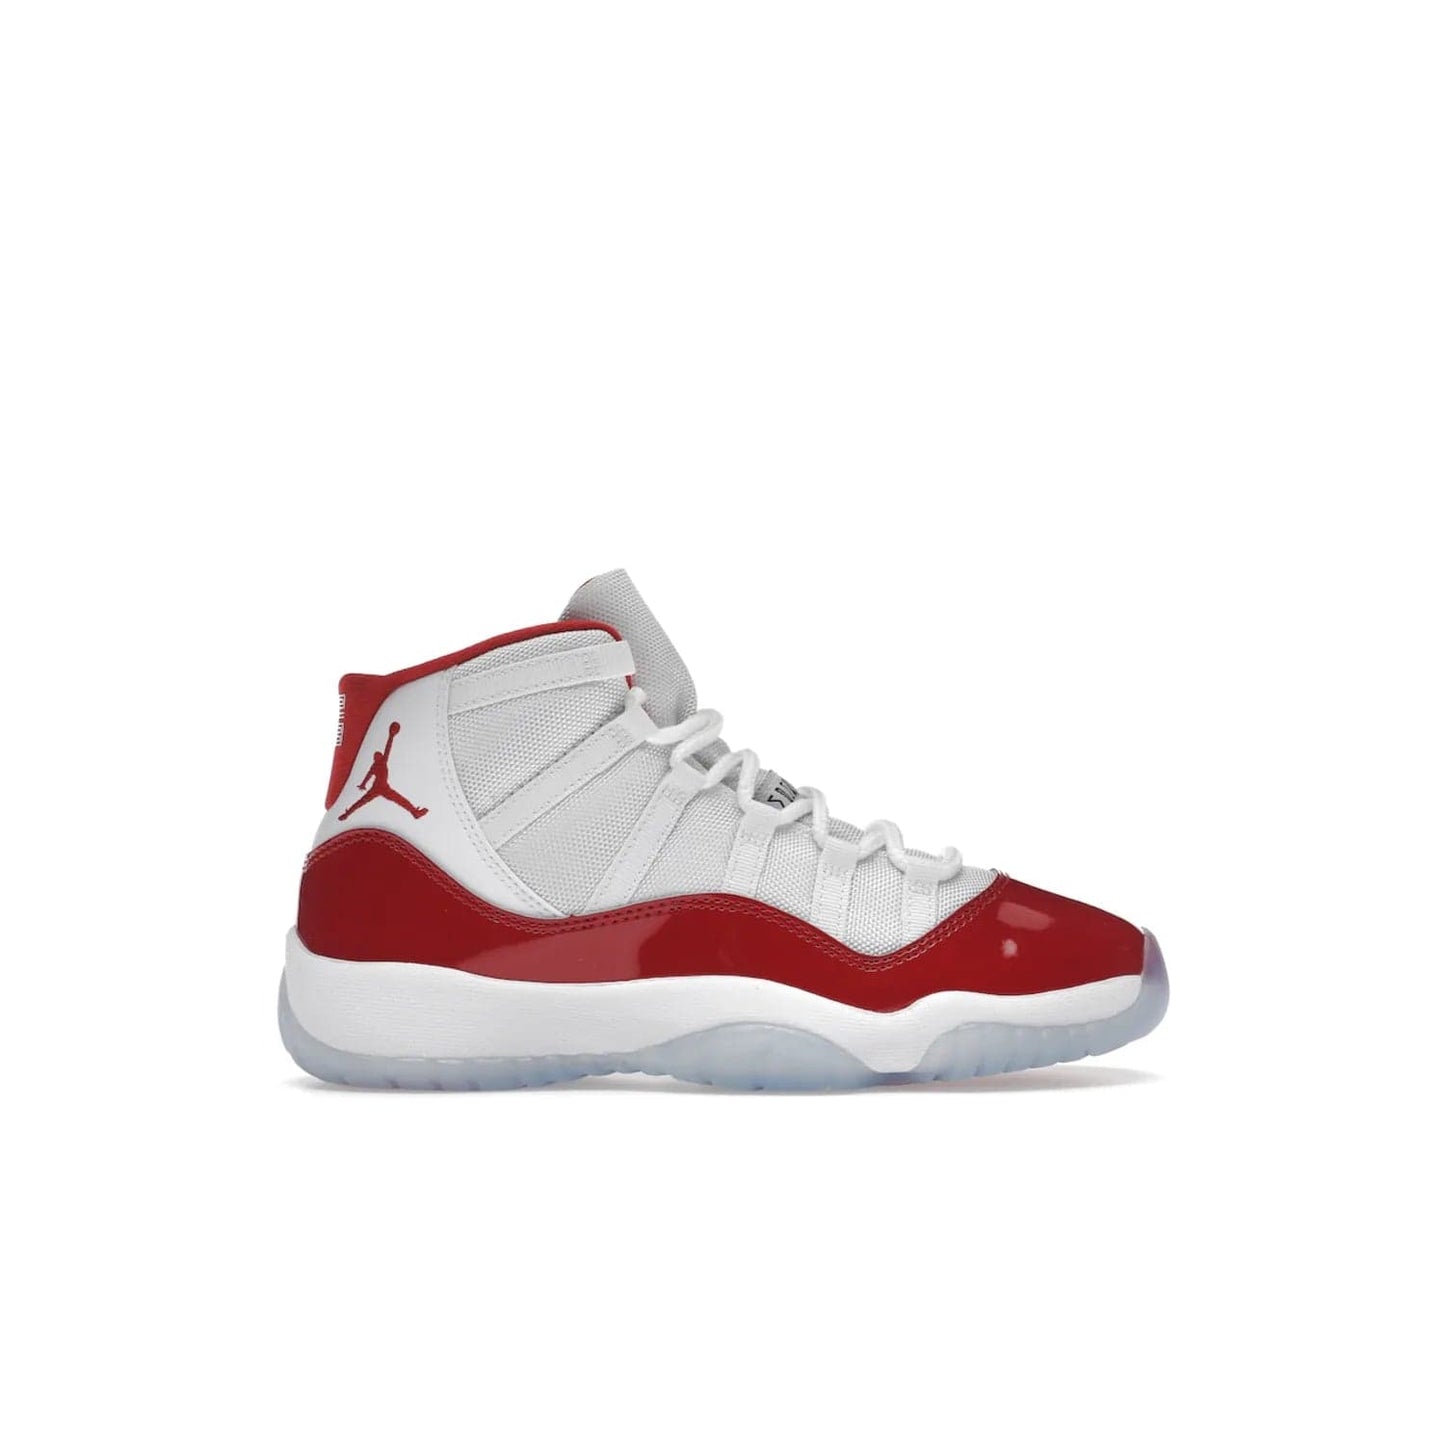 Jordan 11 Retro Cherry (2022) (GS) - Image 1 - Only at www.BallersClubKickz.com - Shop the Air Jordan 11 Retro Cherry 2022 GS, designed for style & comfort. Snug fit with webbing eyelets, rope laces, encased Air-sole unit & a Translucent rubber outsole. Available 12/10/2022.